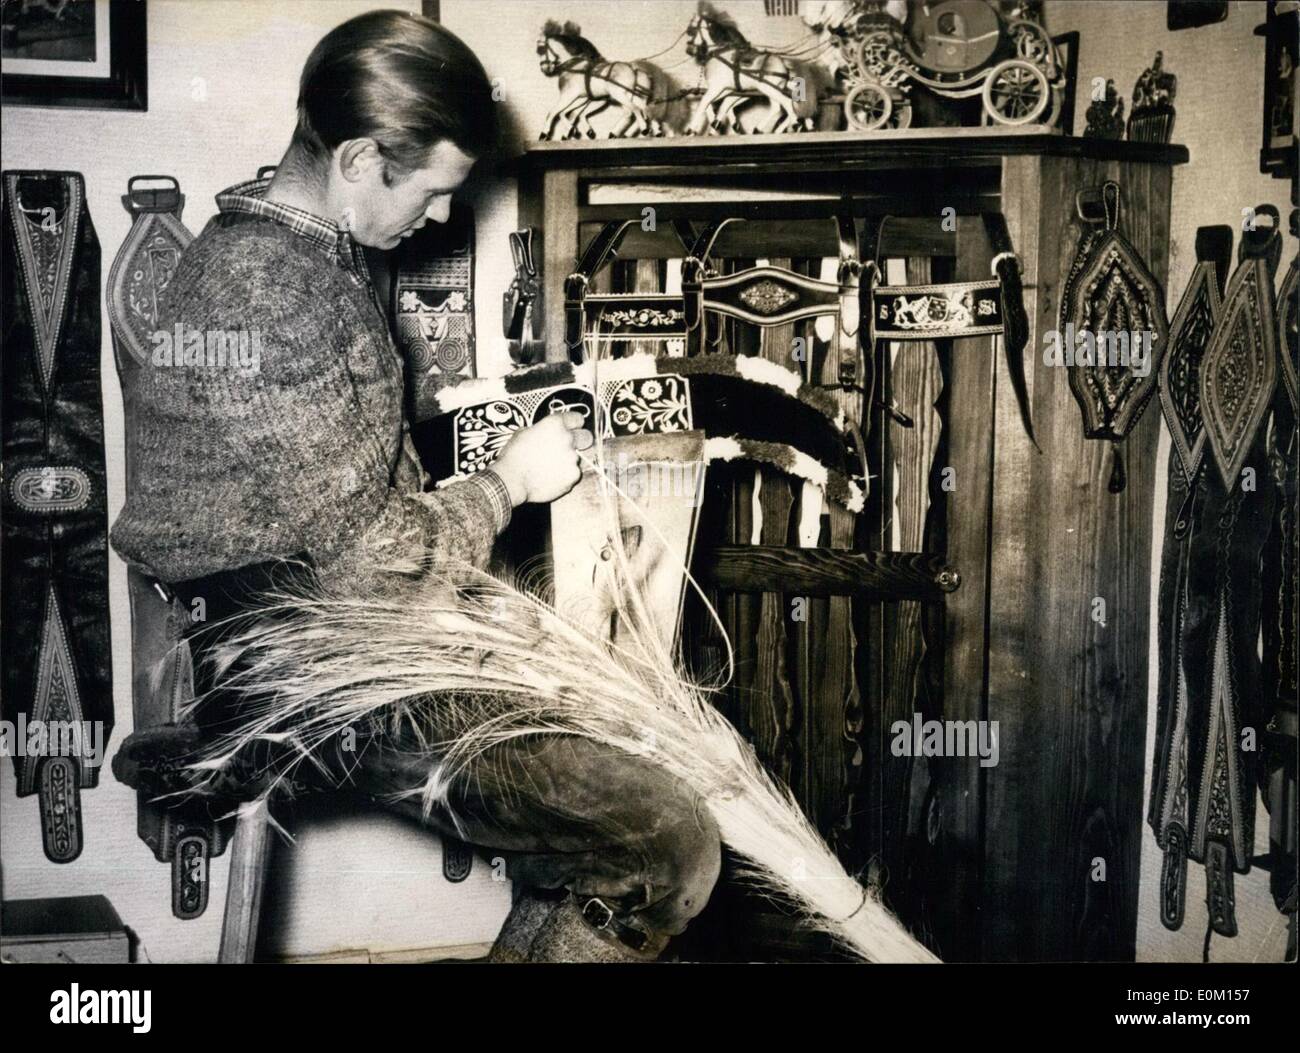 Mar. 03, 1953 - Embroidering with peacock-feathers - - is a trade which already died out. It had, however, its flowering-time about 100 years ago during the time of Andreas Hofer. The harness-maker Karl Stecker of Gmund on the Tegernsee Lake brought this trade to new life. The feathers of the peacock which are about 70 to 80 centimetres long are split and artistical embroideries are made with innumerable stitches on belts, shoes and braces Stock Photo